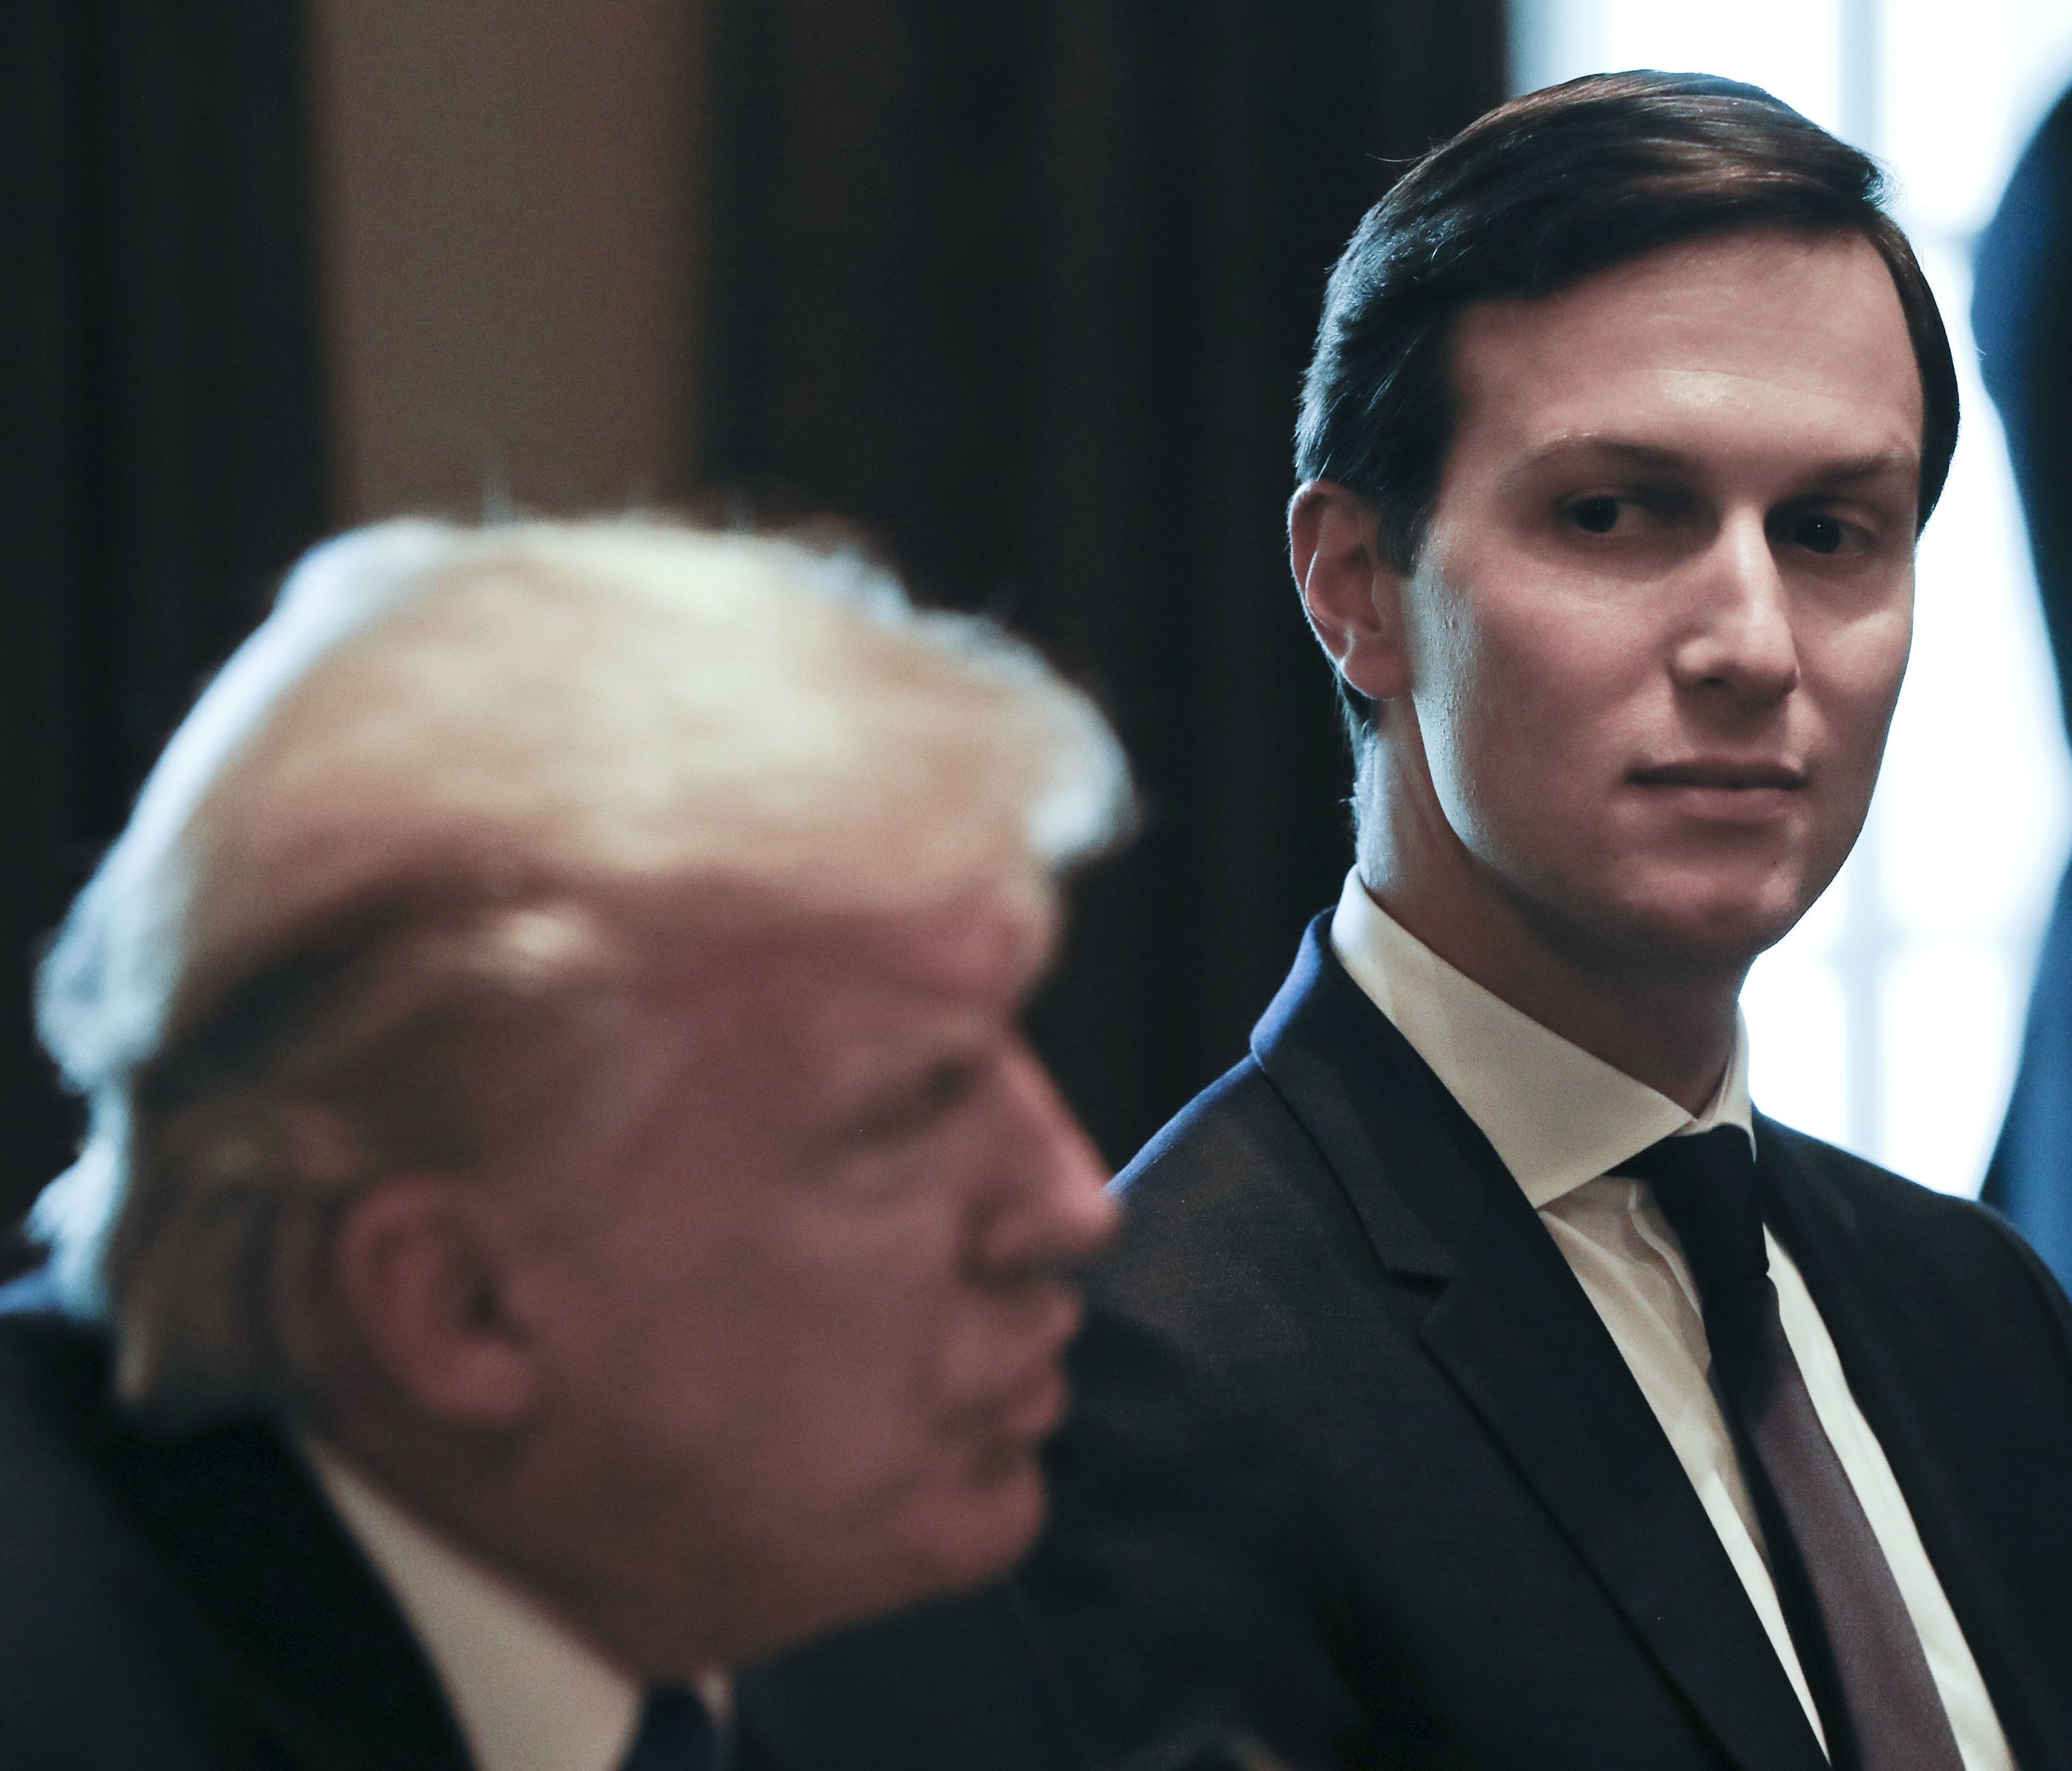 In this July 25, 2017, file photo, Jared Kushner listens at right as President Trump speaks during a meeting in the Cabinet Room of the White House.